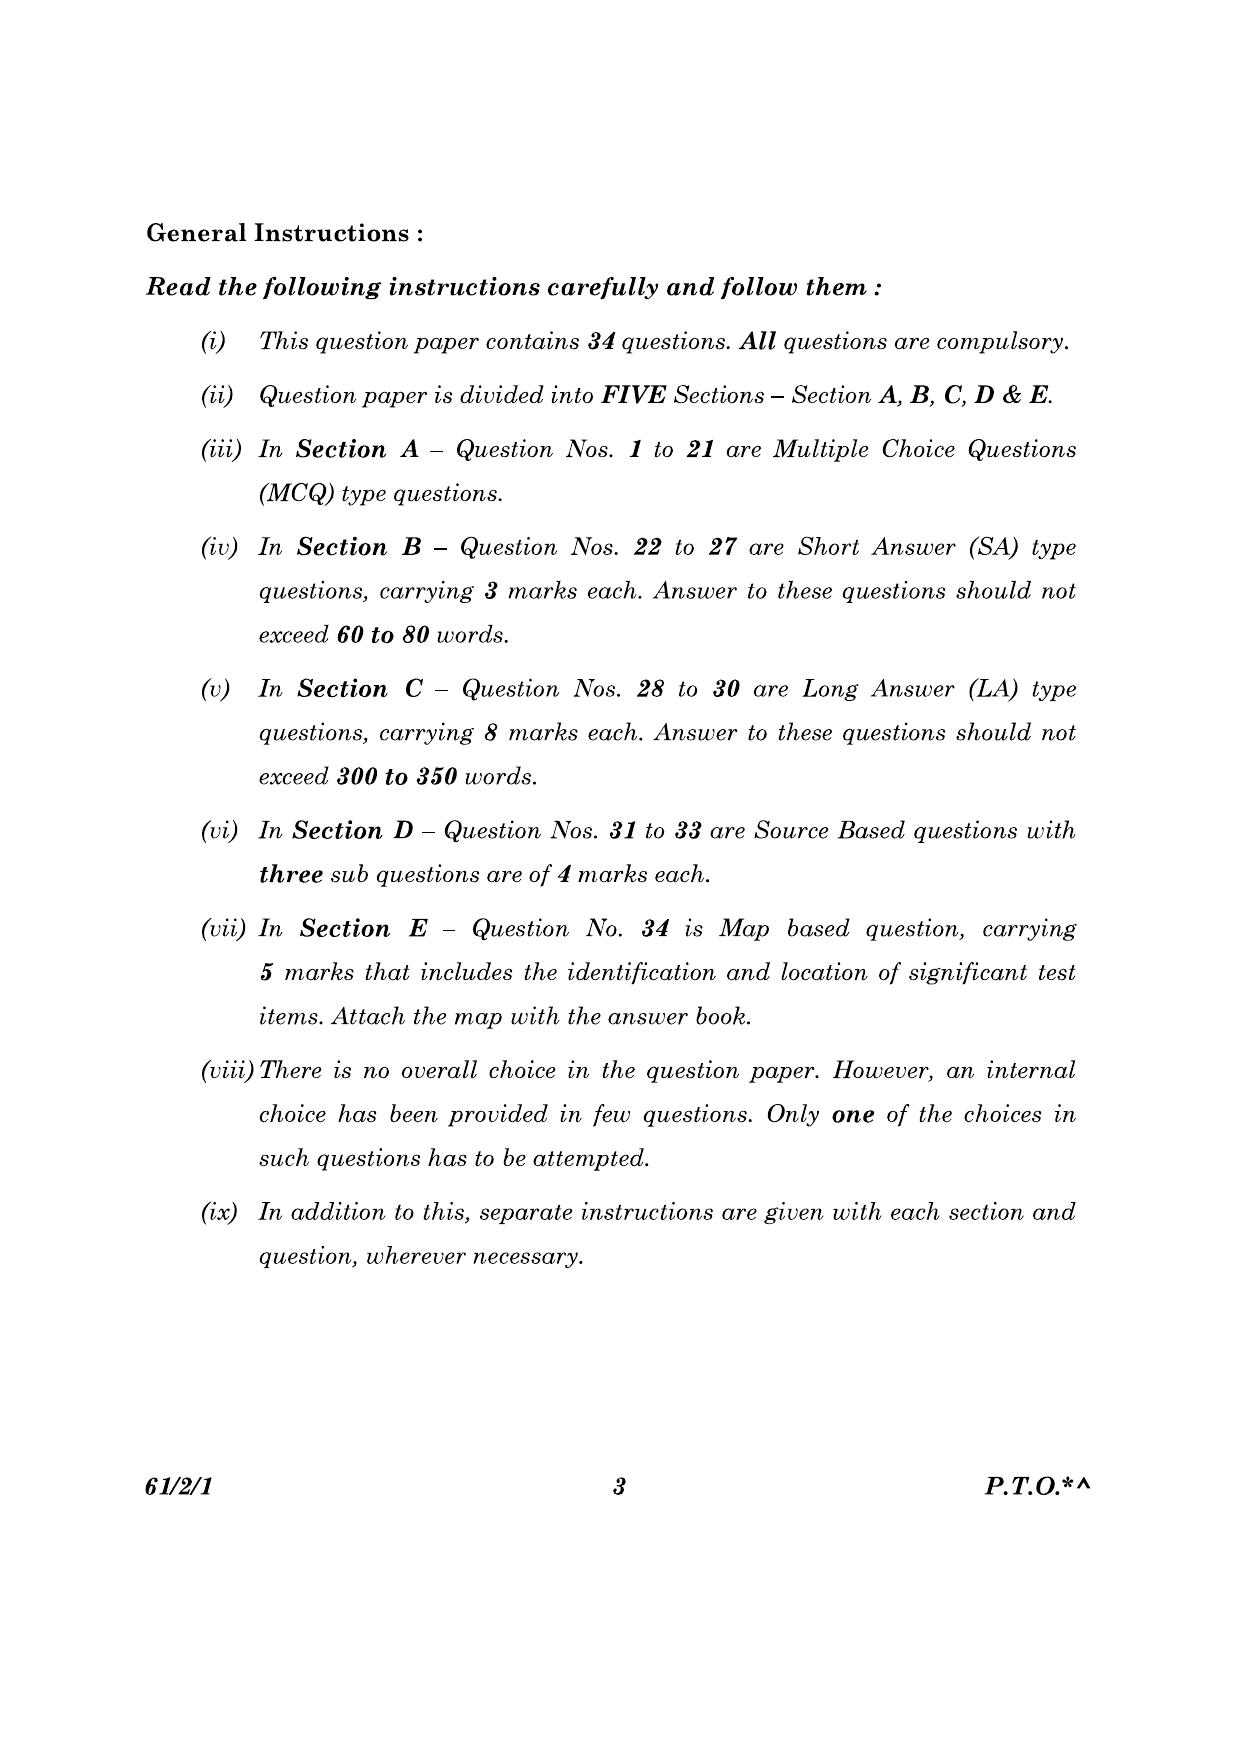 CBSE Class 12 61-2-1 History 2023 Question Paper - Page 3